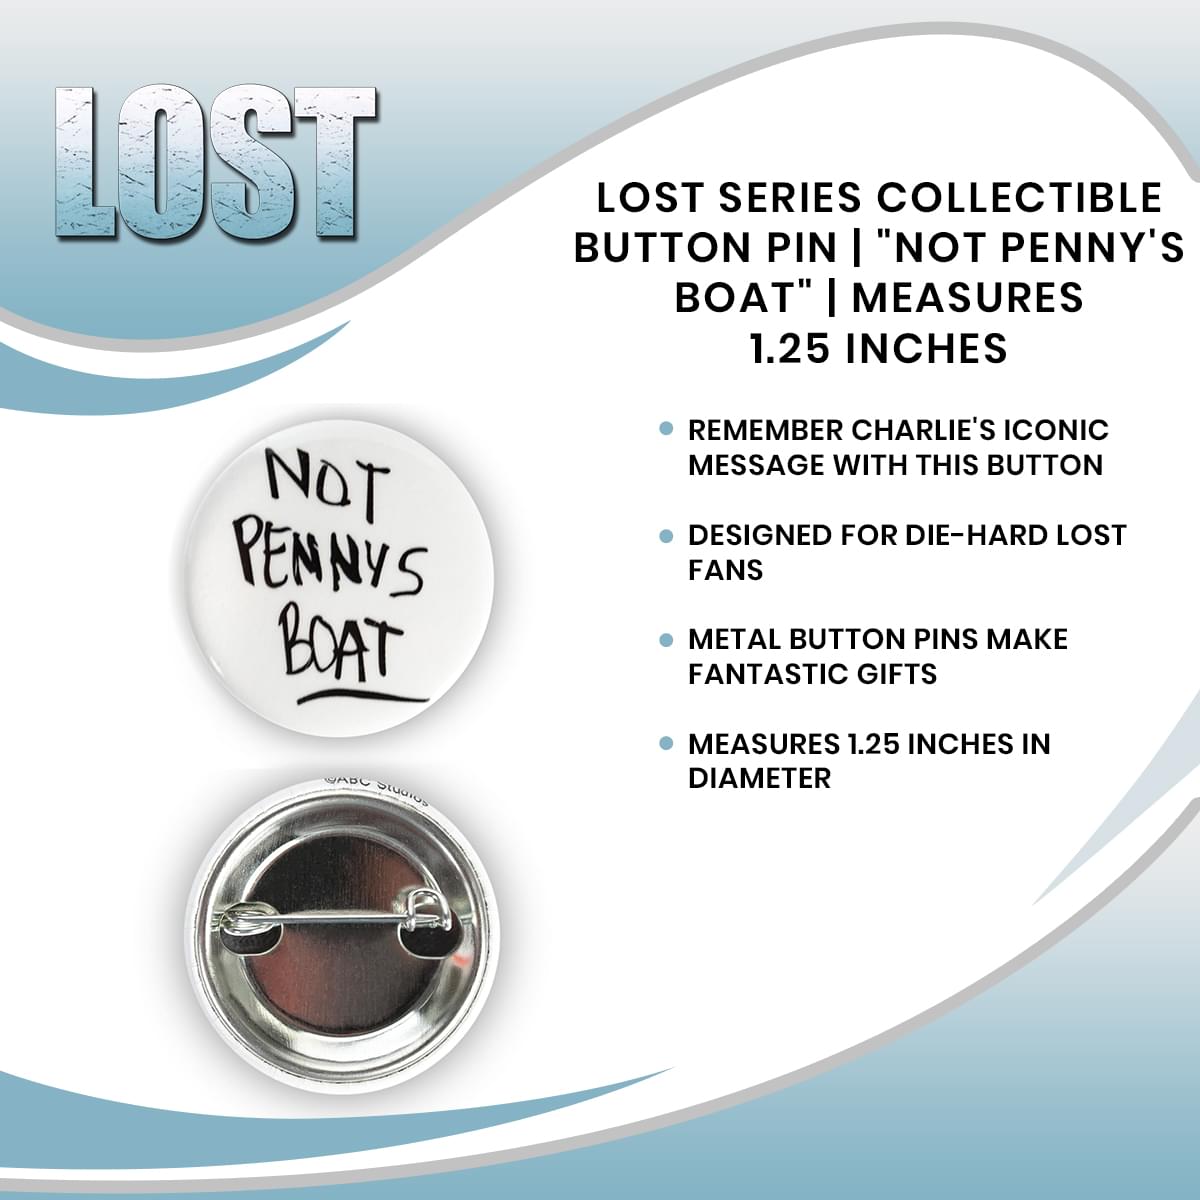 Lost Series Collectible Button Pin | "Not Penny's Boat" | Measures 1.25 Inches